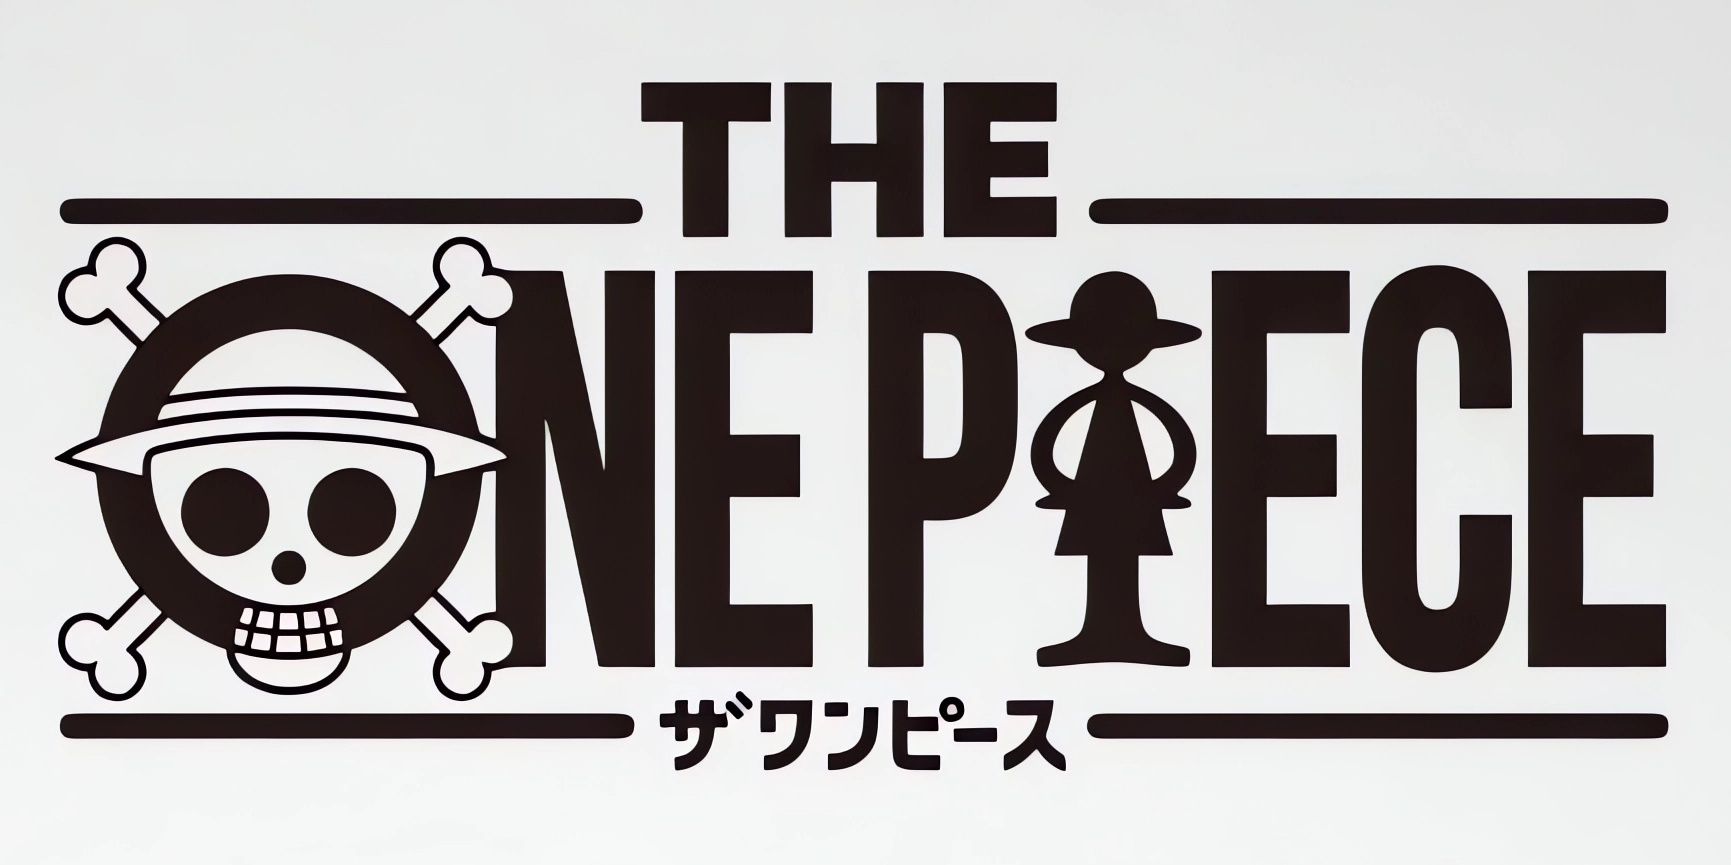 The re-creation of One Piece has officially been developed